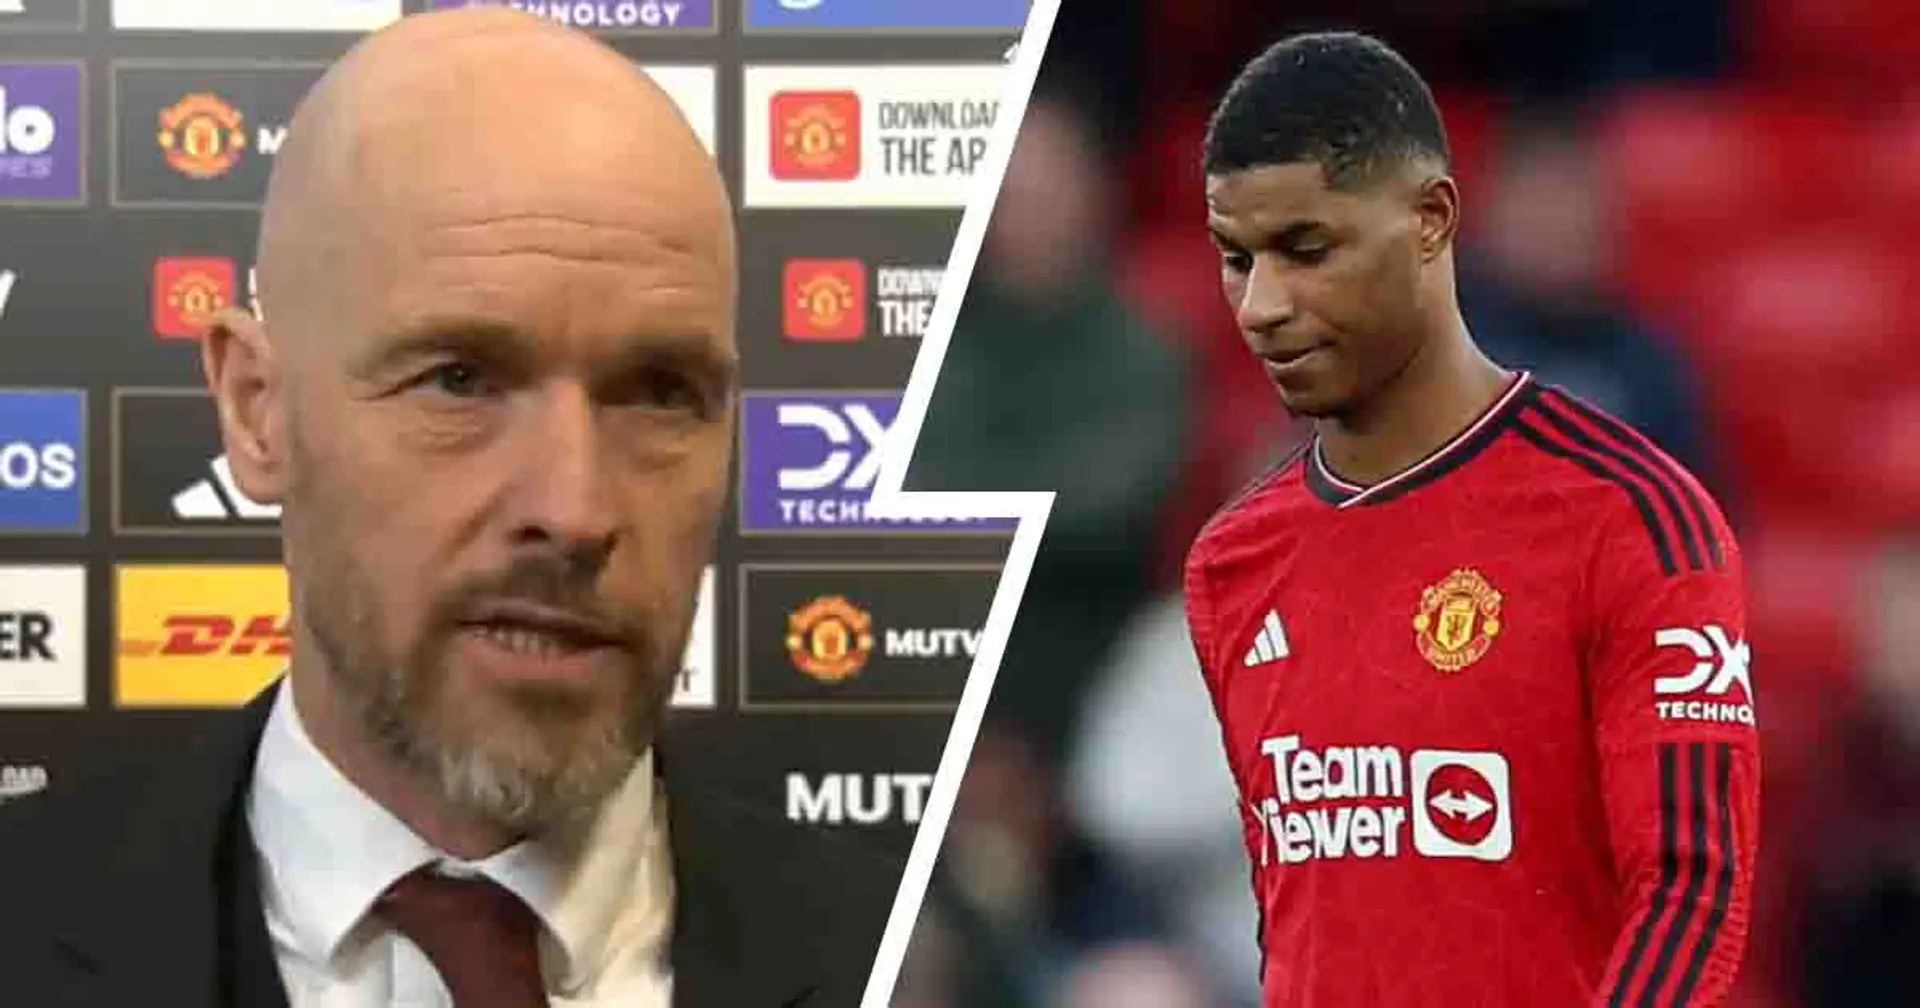 Ten Hag explains why Antony's been replaced with Rashford, reason for McTominay's absence also revealed